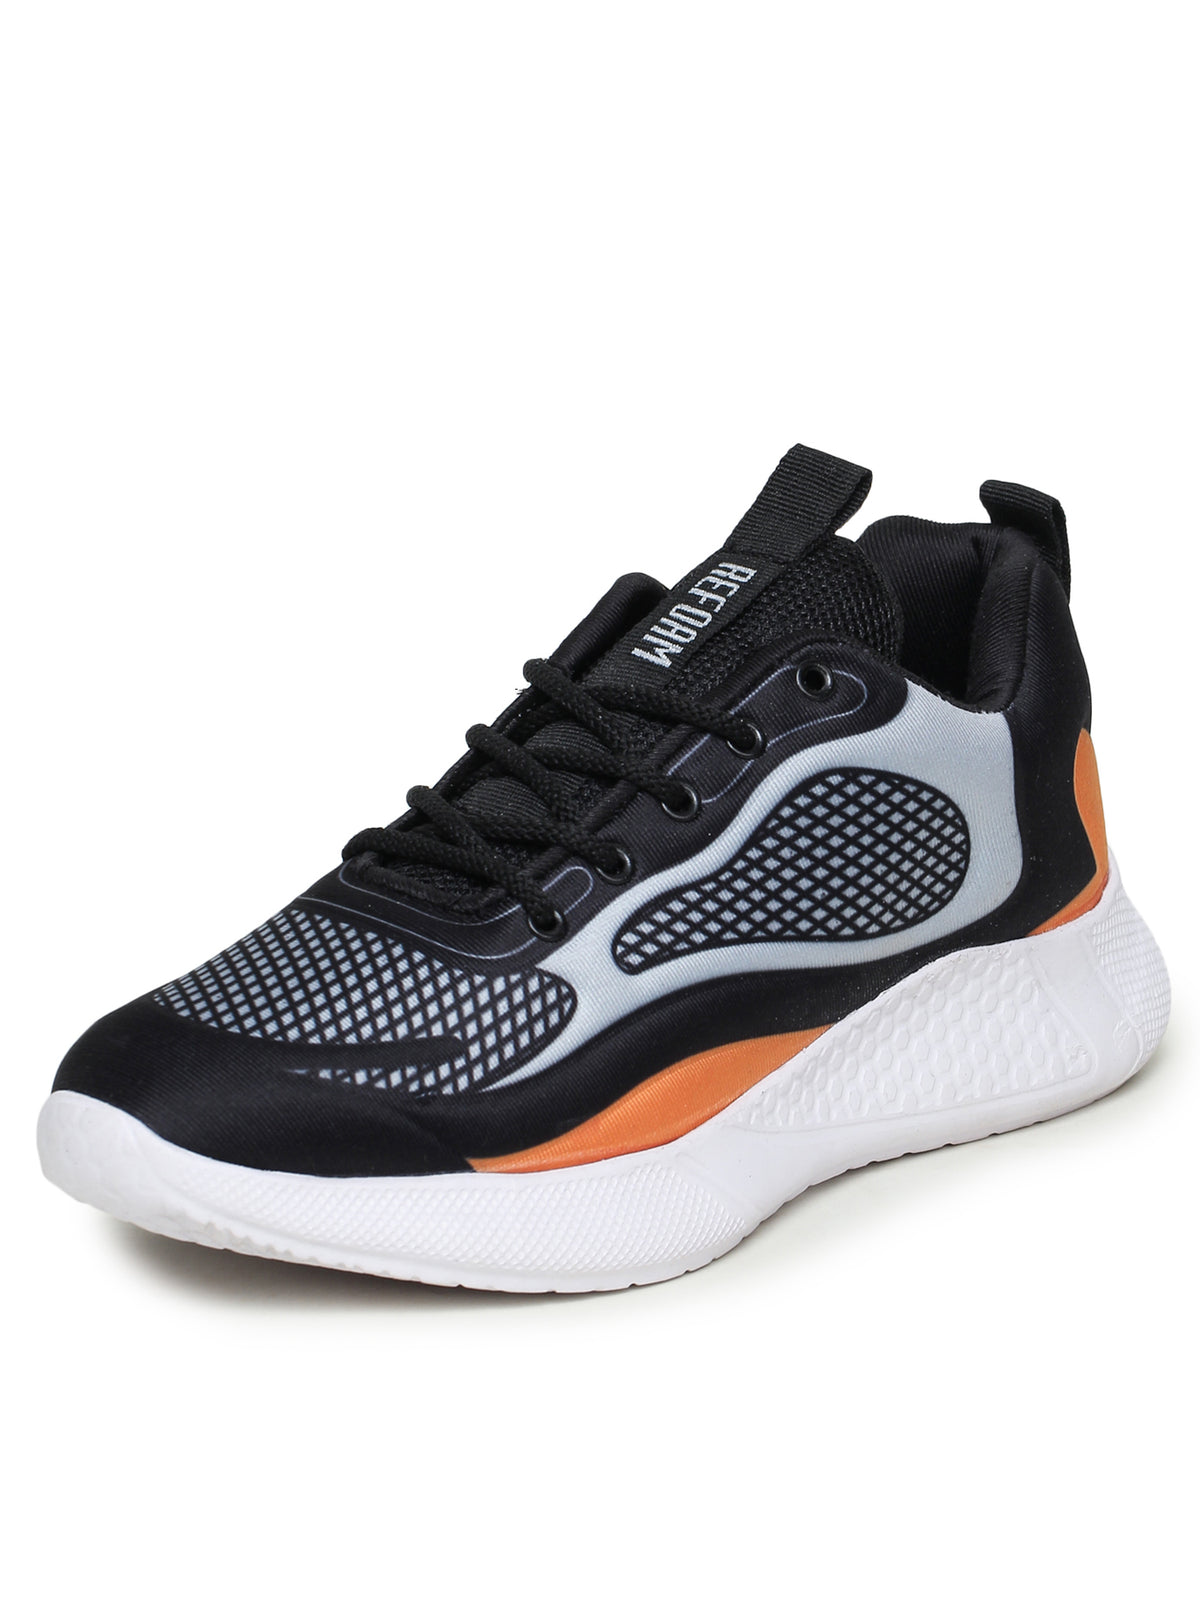 Orange Solid Fabric Lace Up Running Sport Shoes For Men